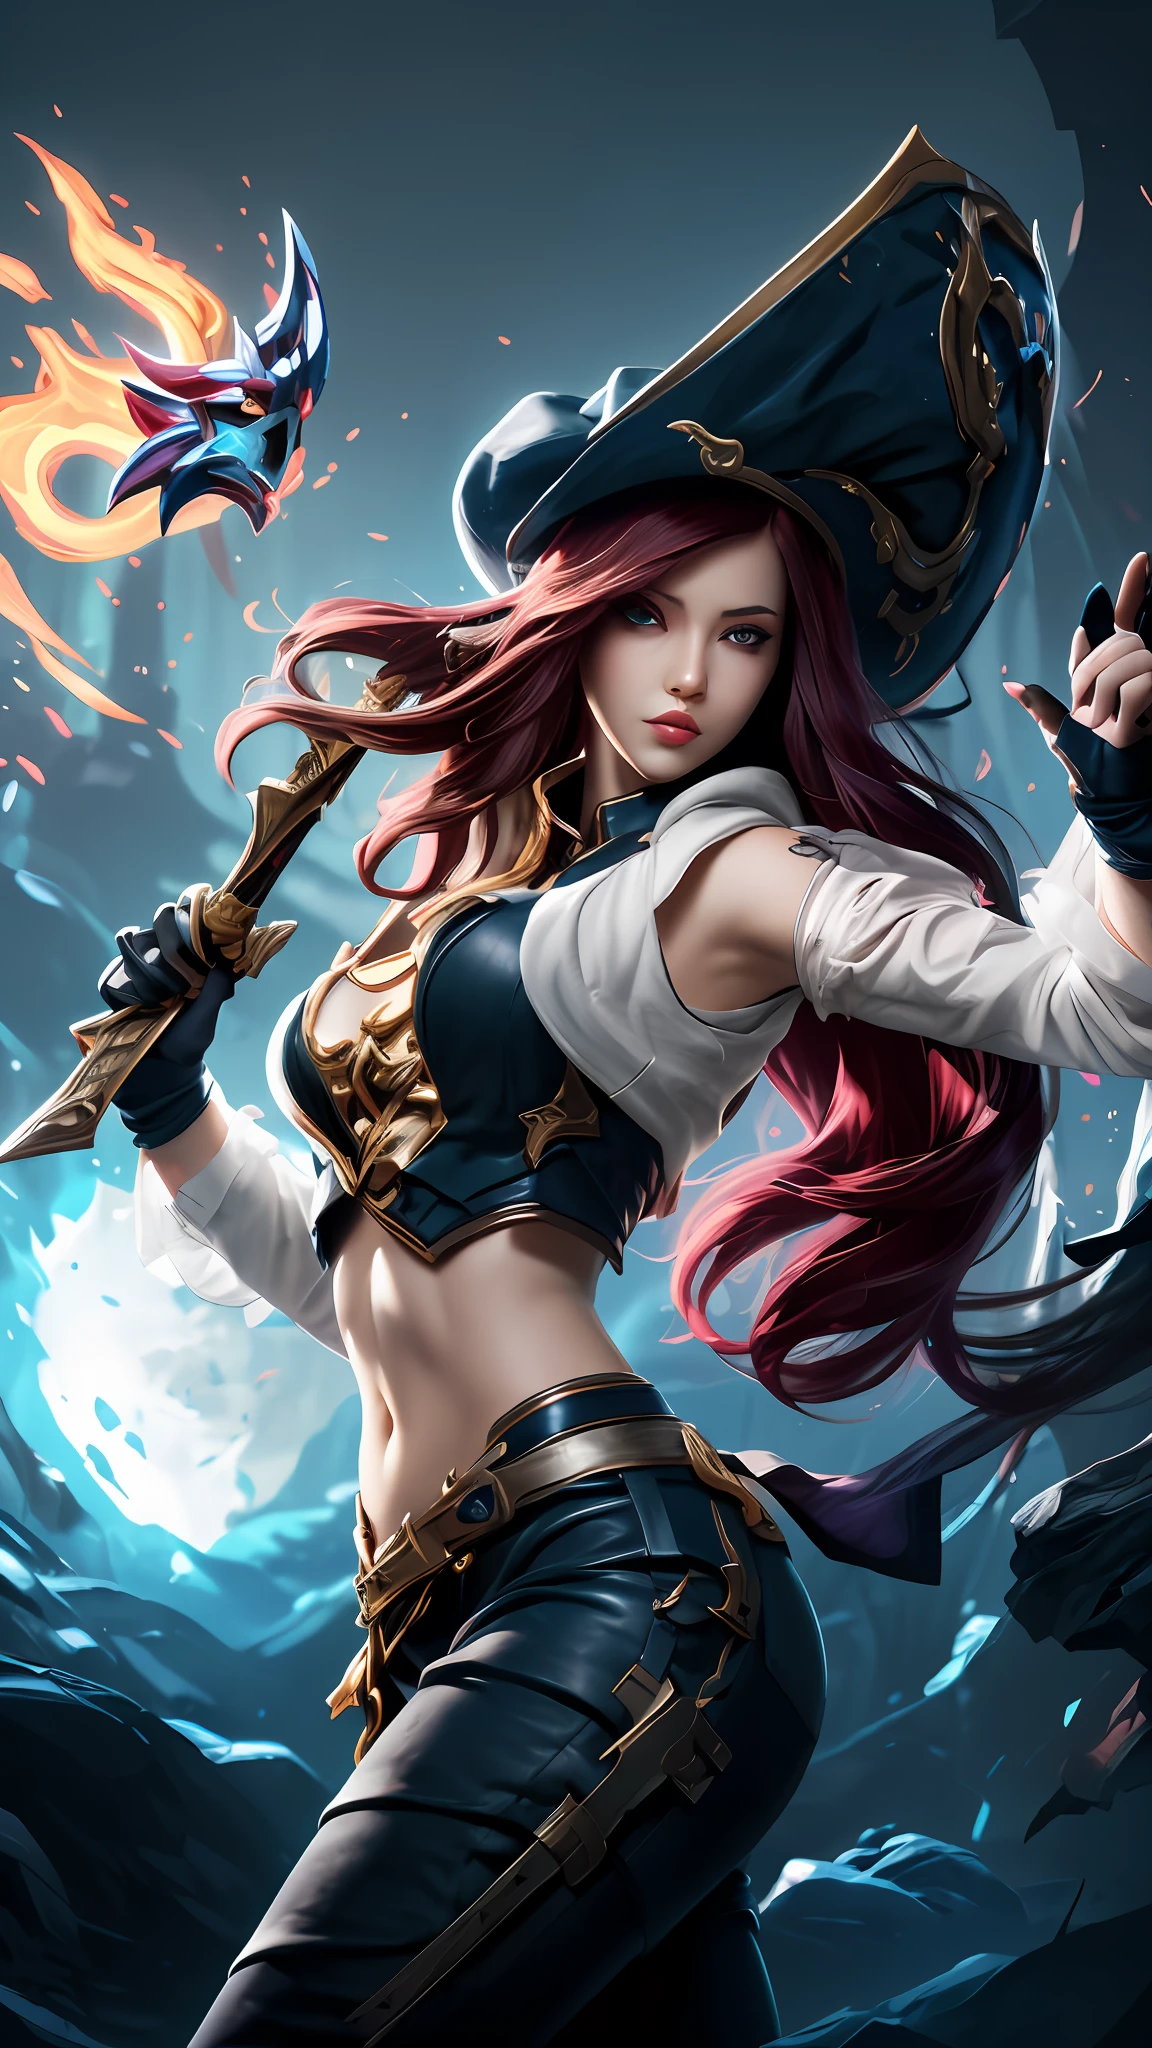 Close-up of a woman holding a sword and a hat, miss fortune league of legends, miss fortune, Katarina, League of Legends character, style league of legends, katarina from league of legends, league of legends art, league of legends character art, league of legends splashart, league of legends style art, league of legends splashart, Style Artgerm